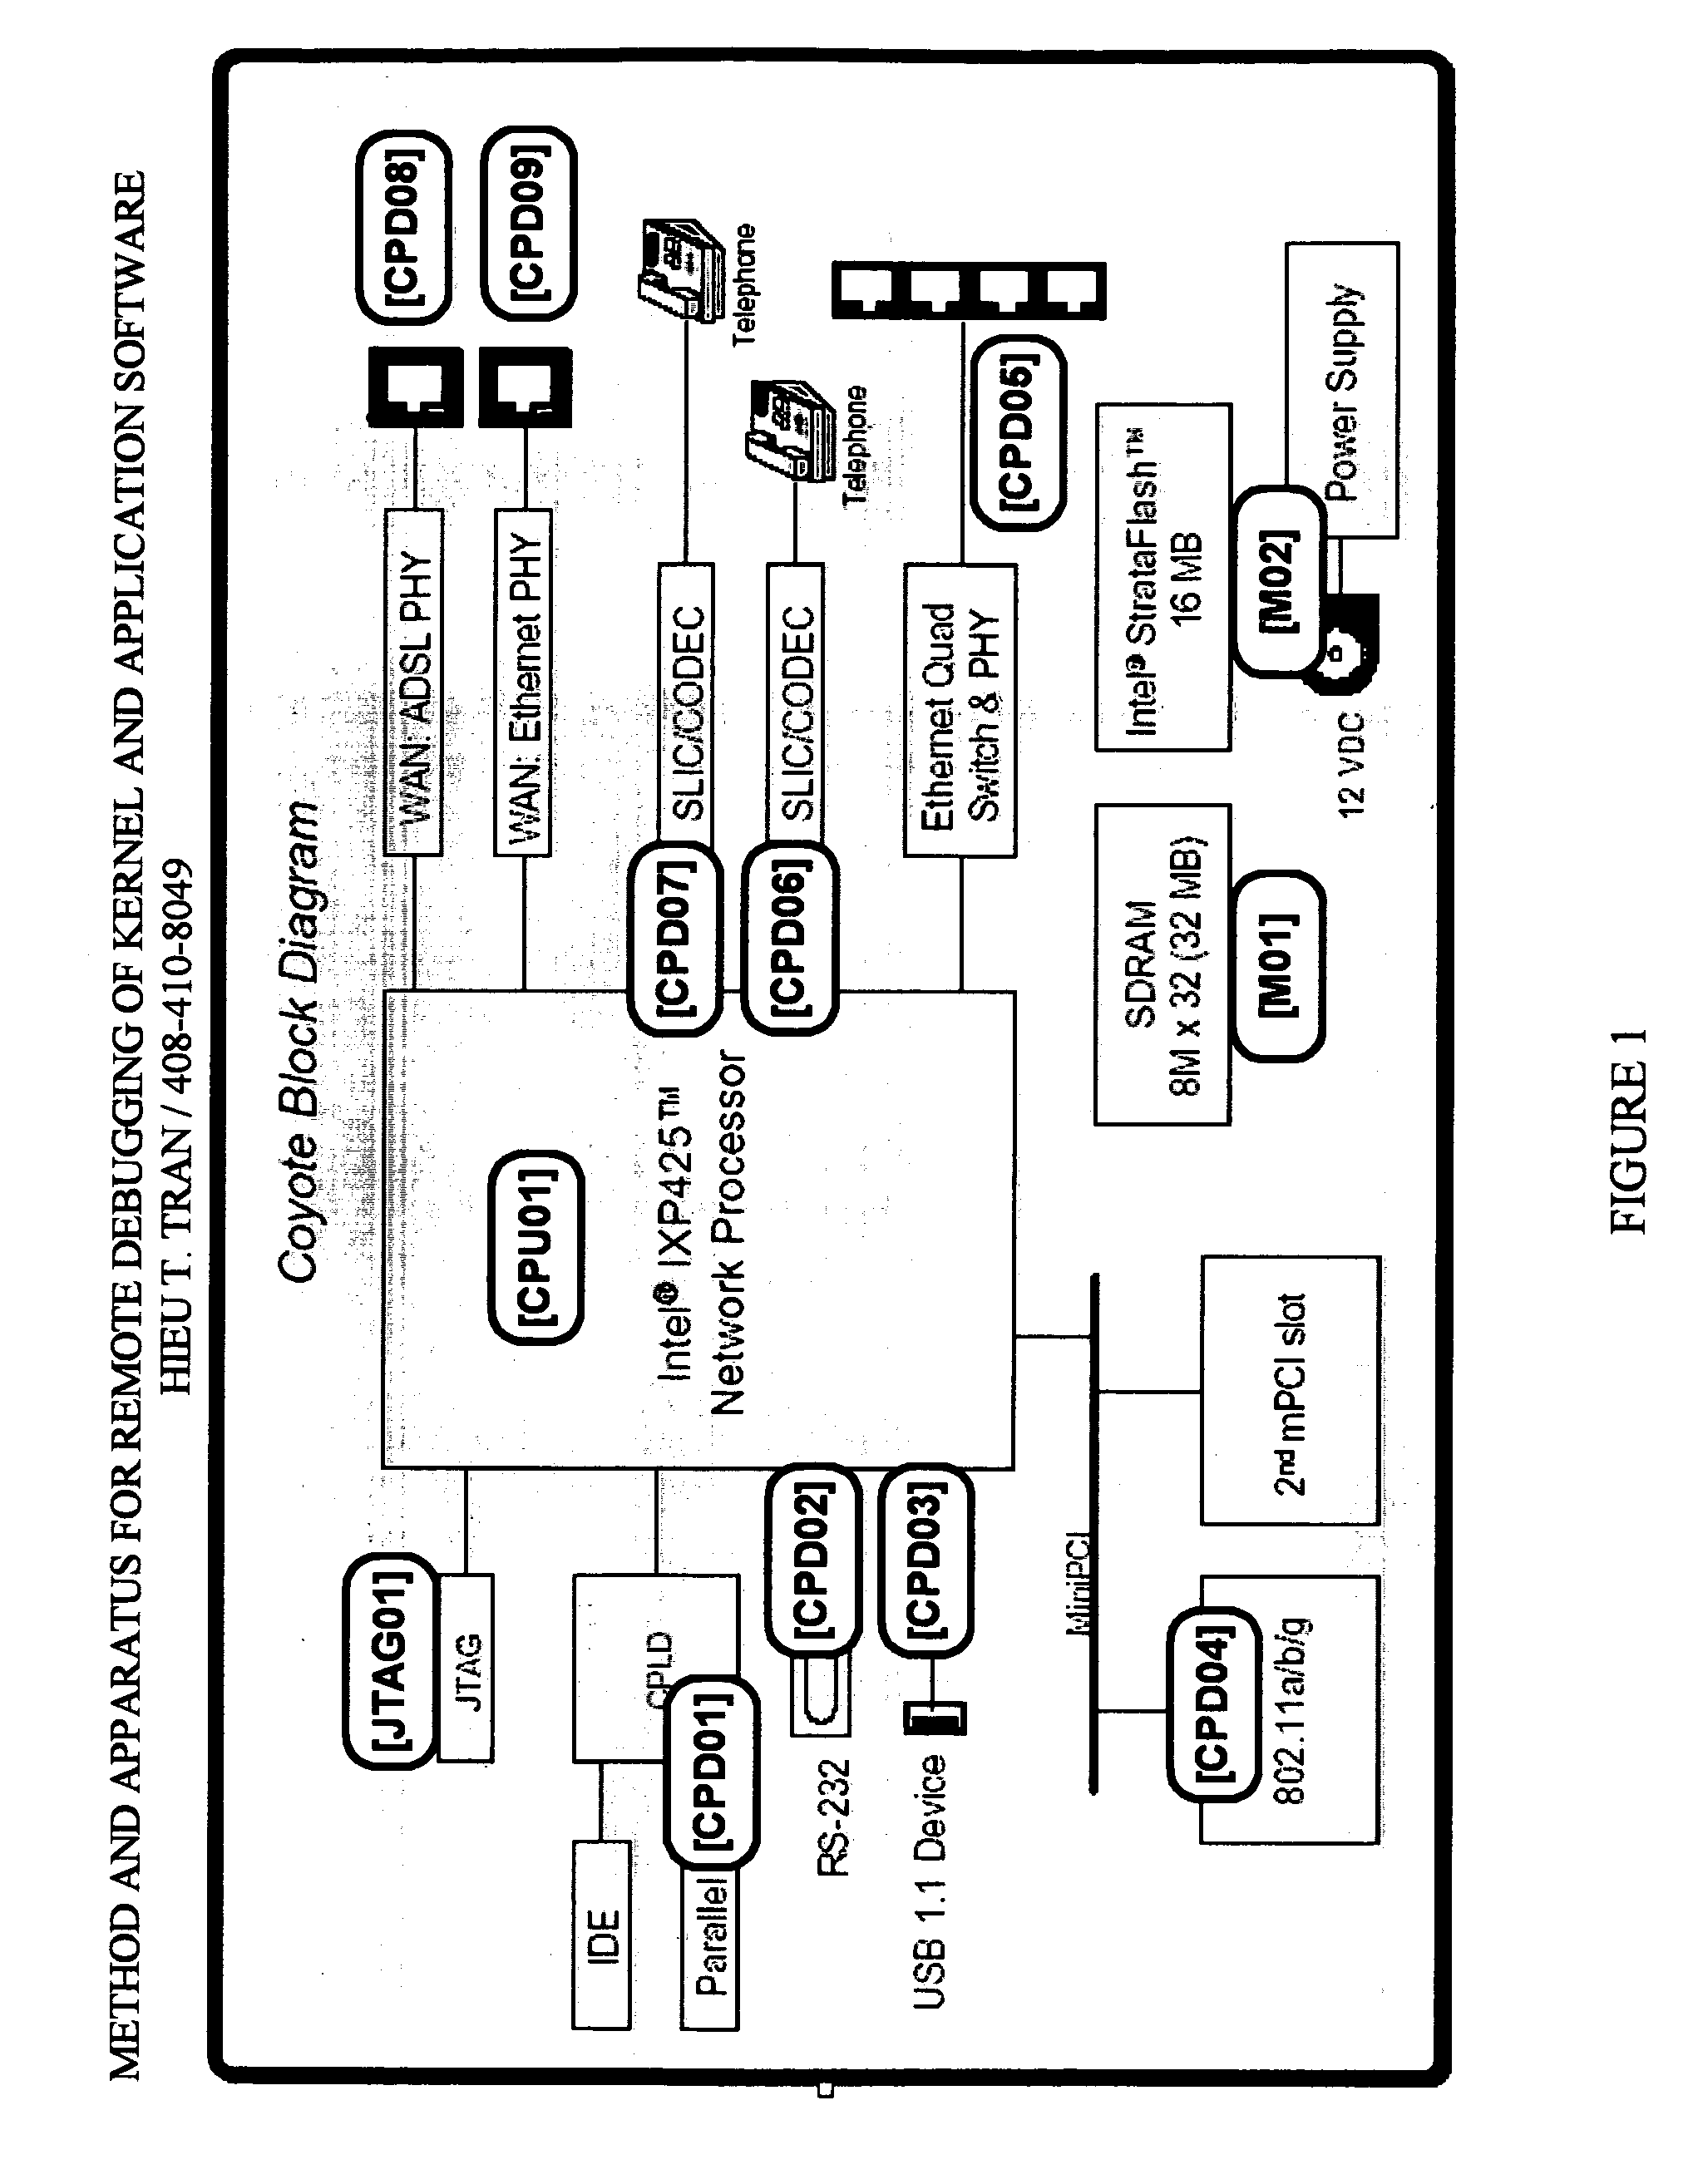 Method and apparatus for remote debugging of kernel and application software